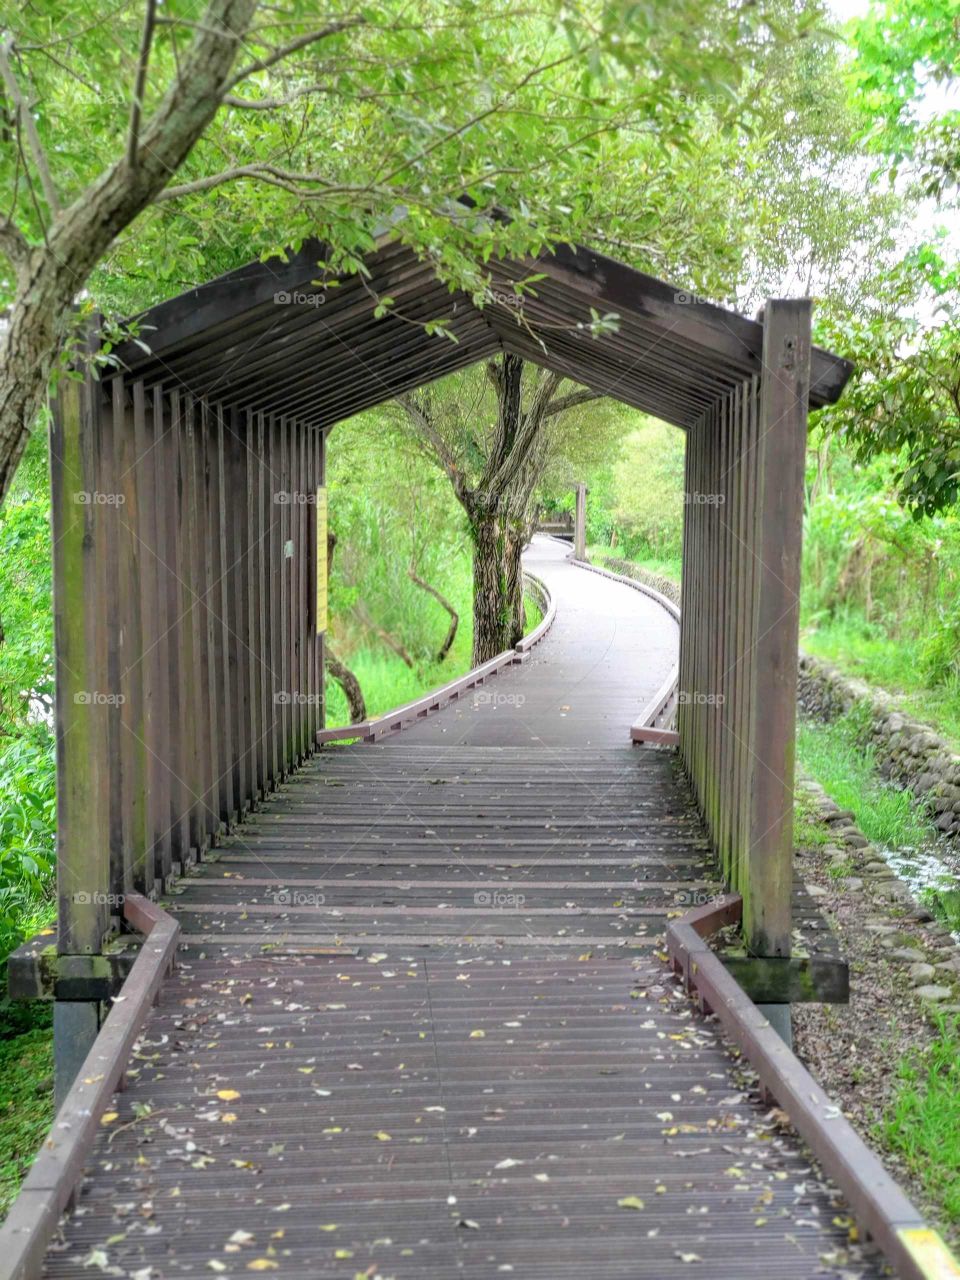 The walking trail of Luodong Forestry Culture Park.